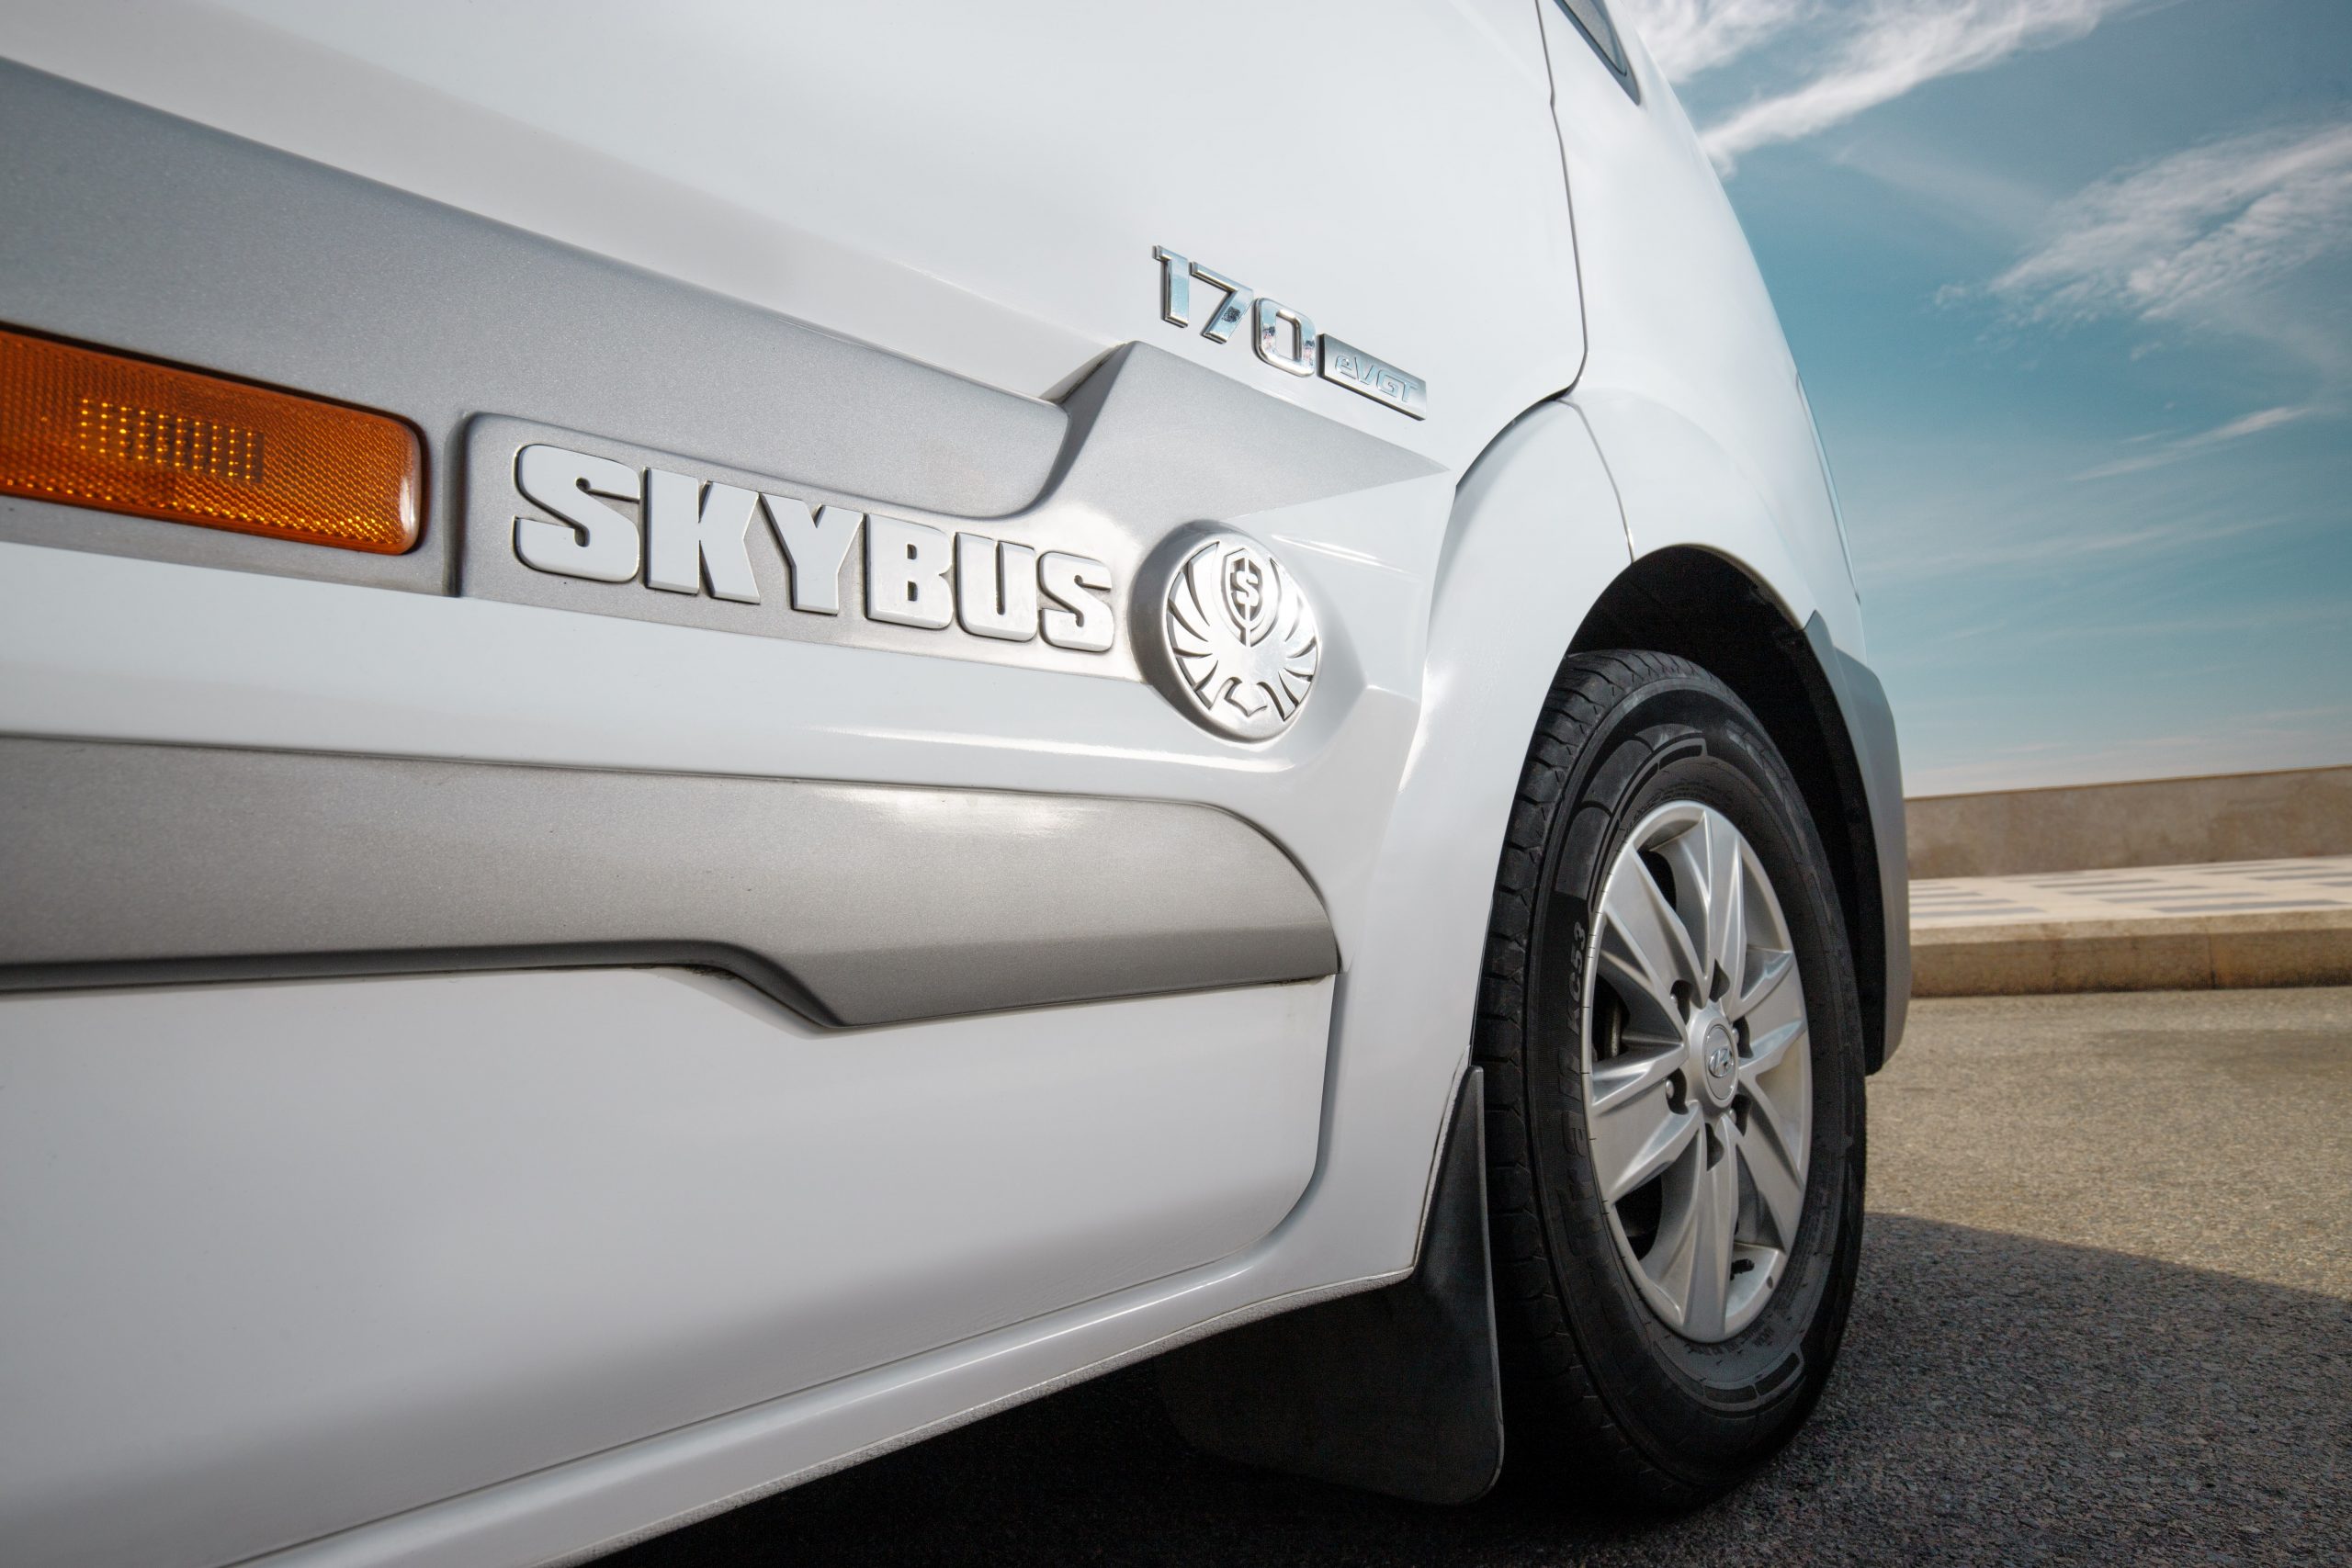 skybus bold